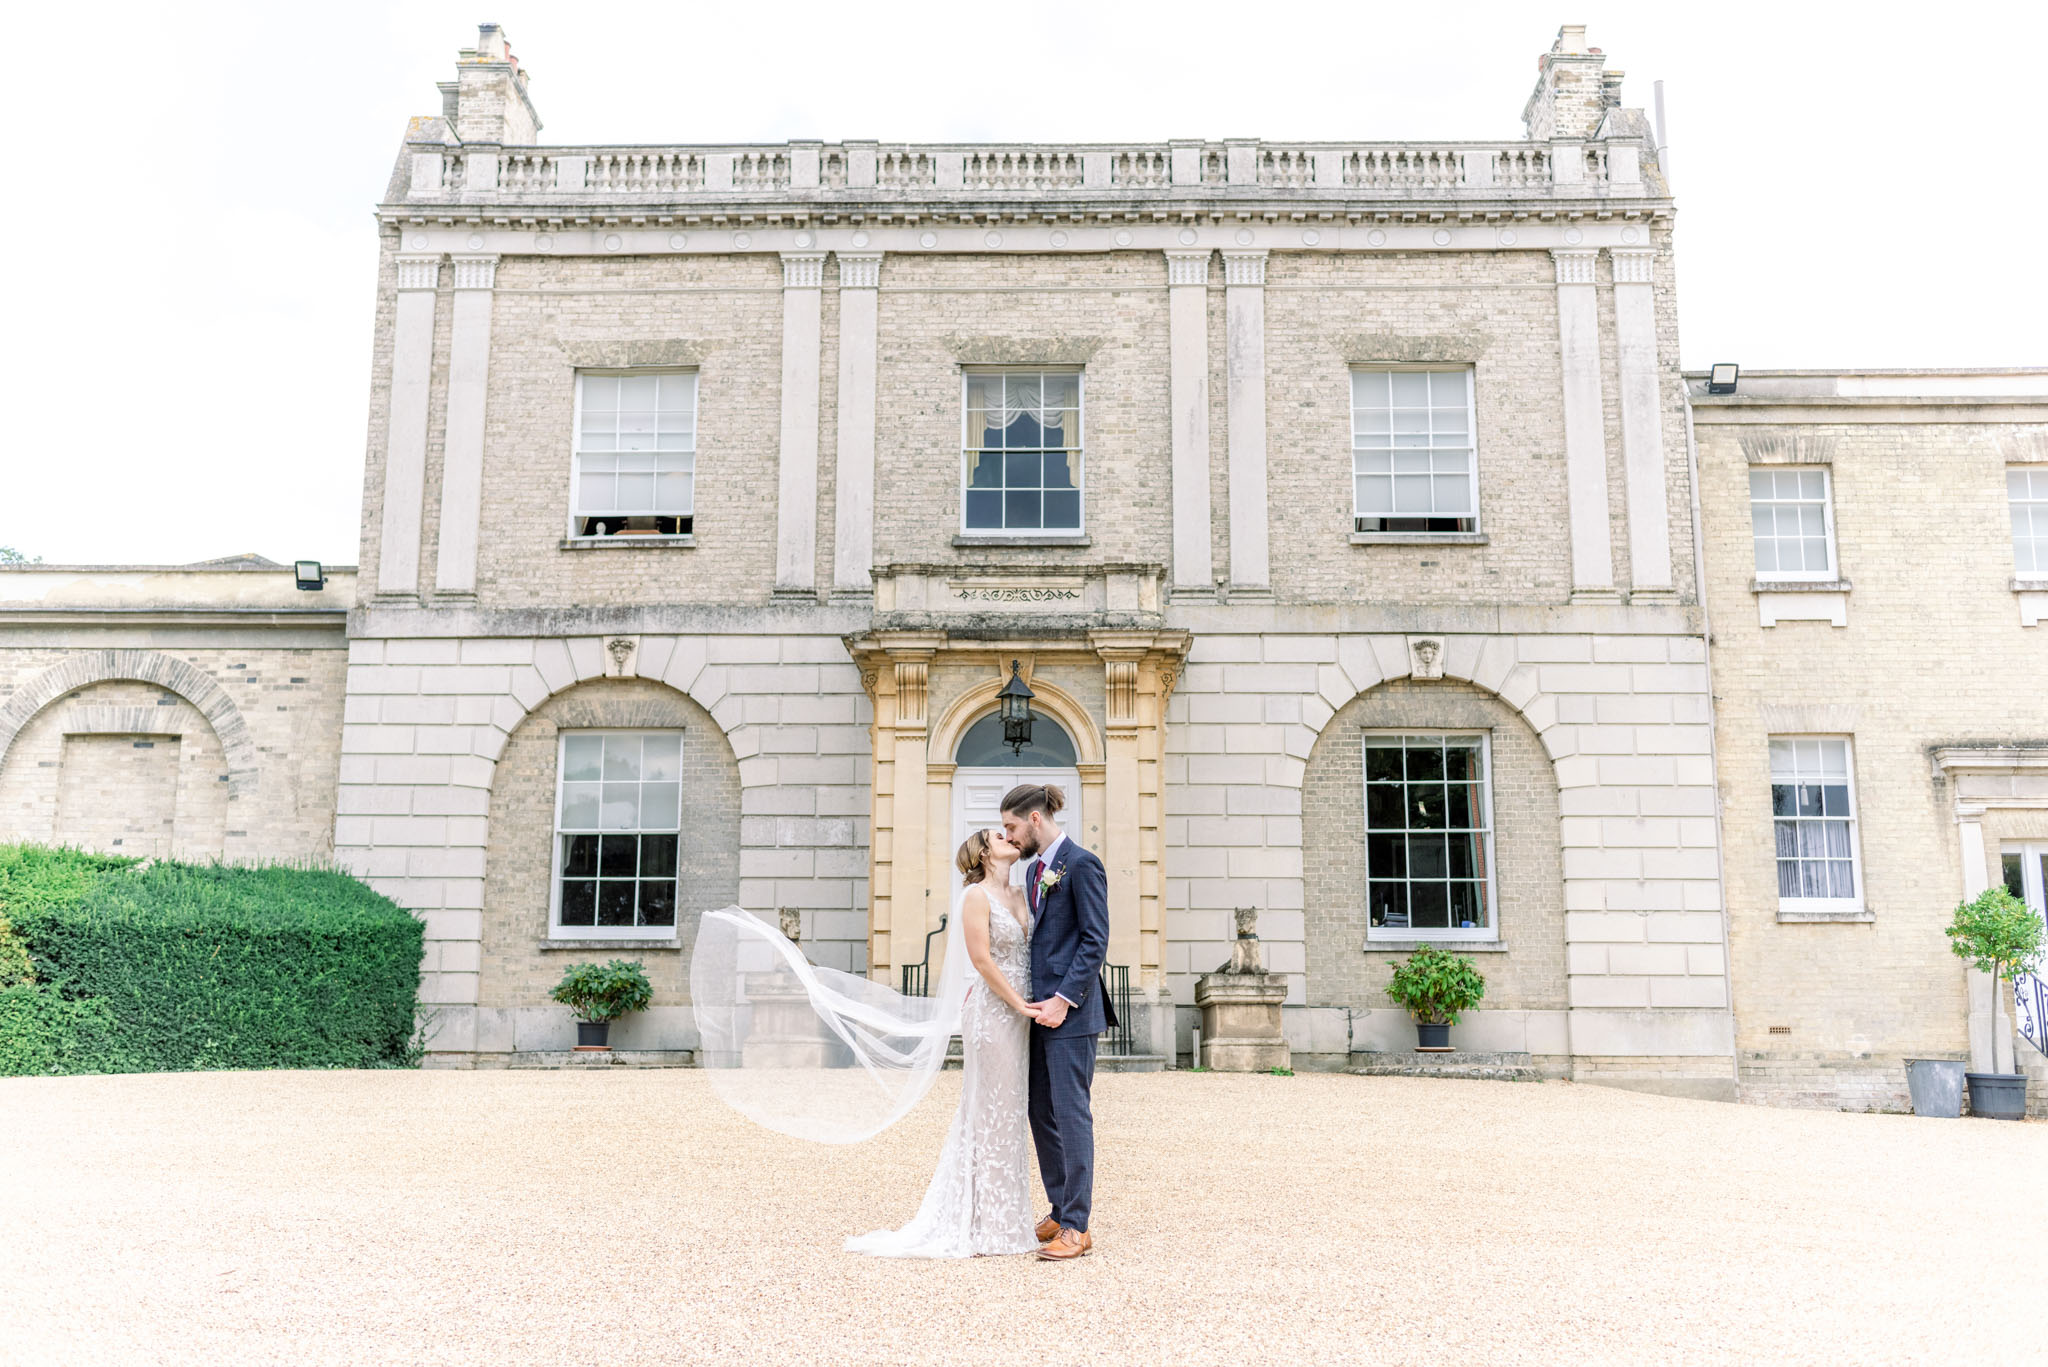 https://usercontent.one/wp/www.natalieandmax.co.uk/wp-content/uploads/2022/09/L-J-Natalie-and-Max-Photo-and-Films-Hatfield-Place-Wedding-Photography-565.jpg?media=1711985334